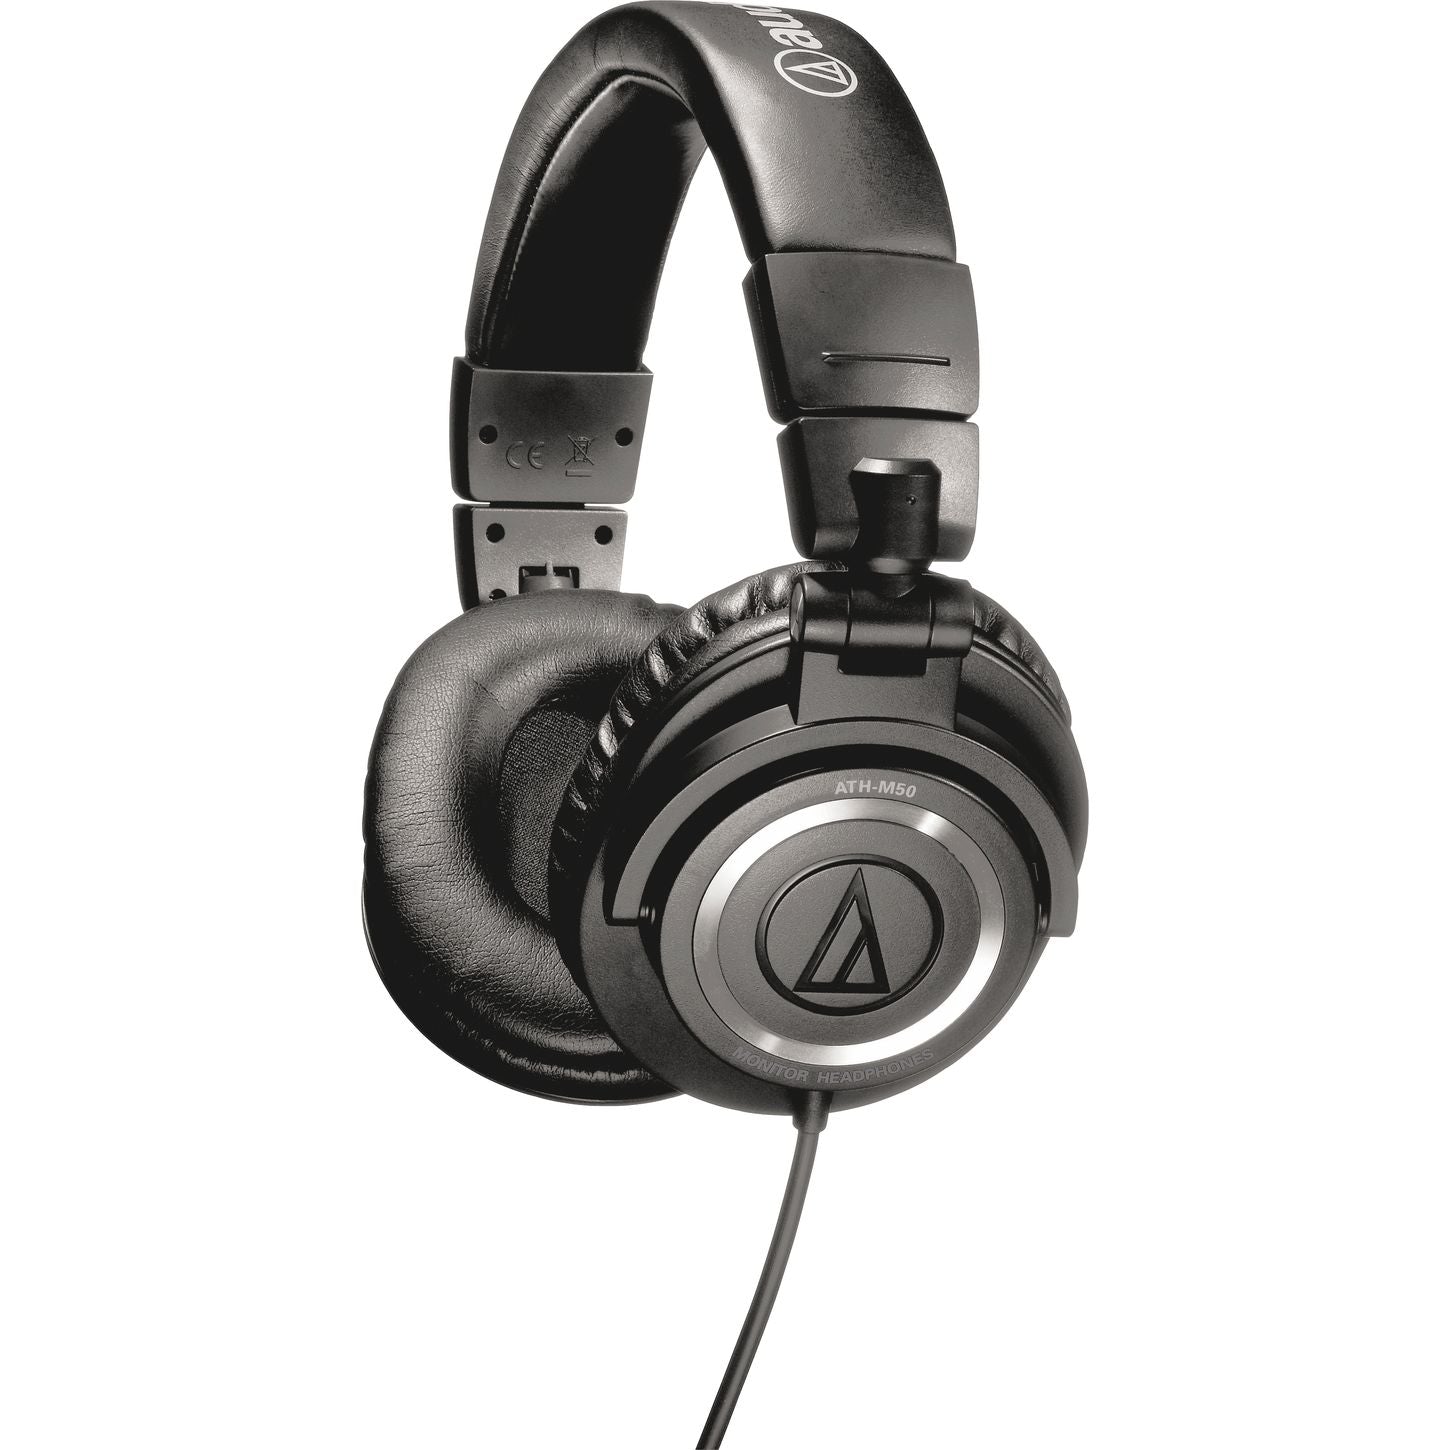 Audio Technica ATH-M50 Hands On Review